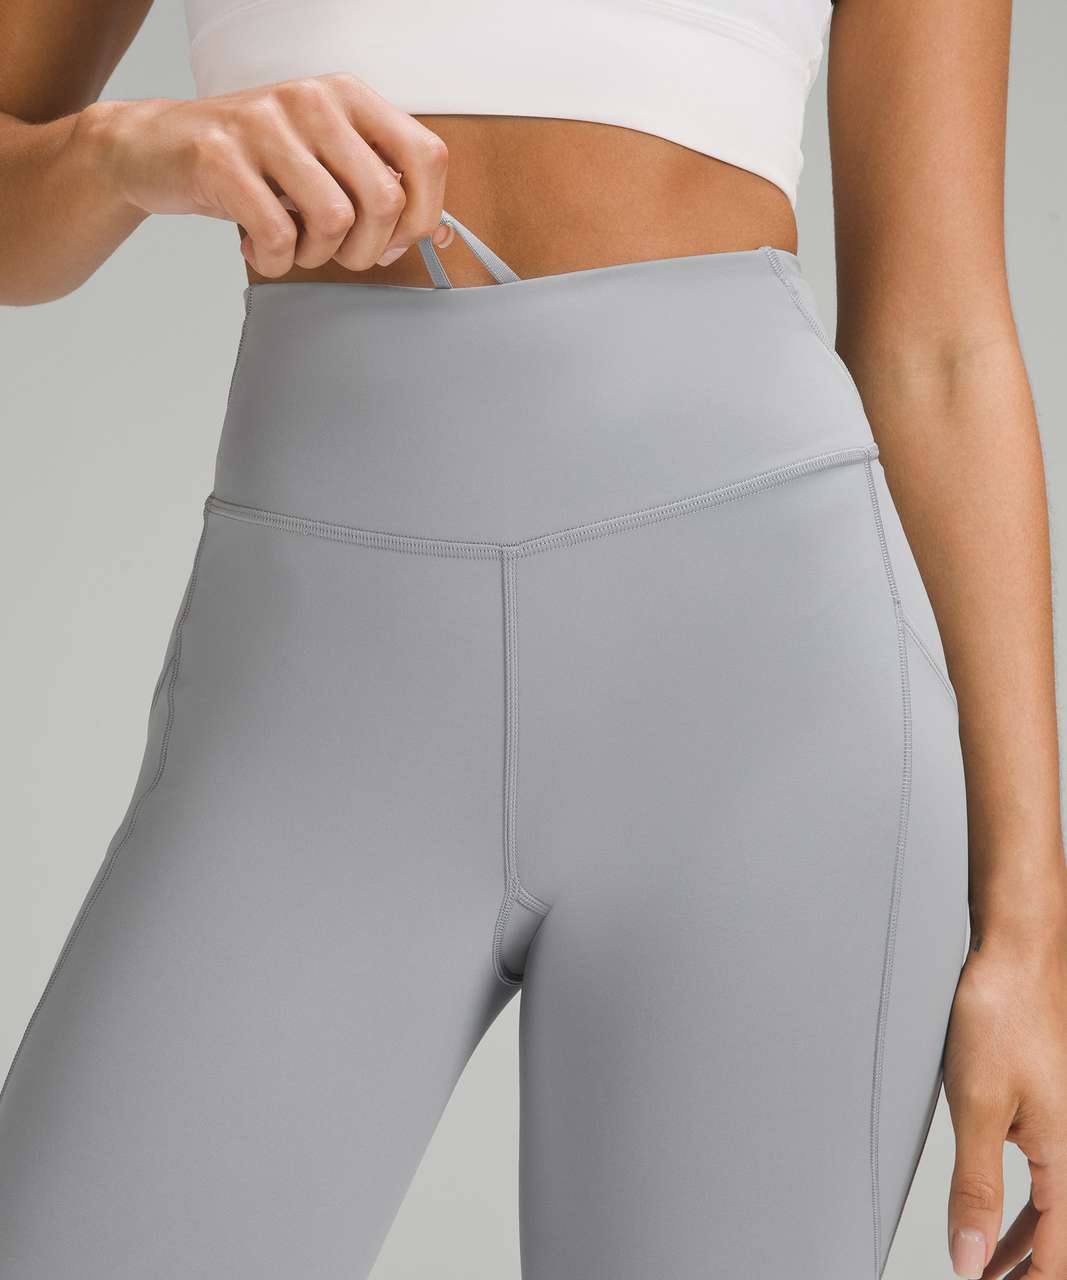 Lululemon Fast and Free High-Rise Tight 25” Pockets *Updated - Rhino Grey